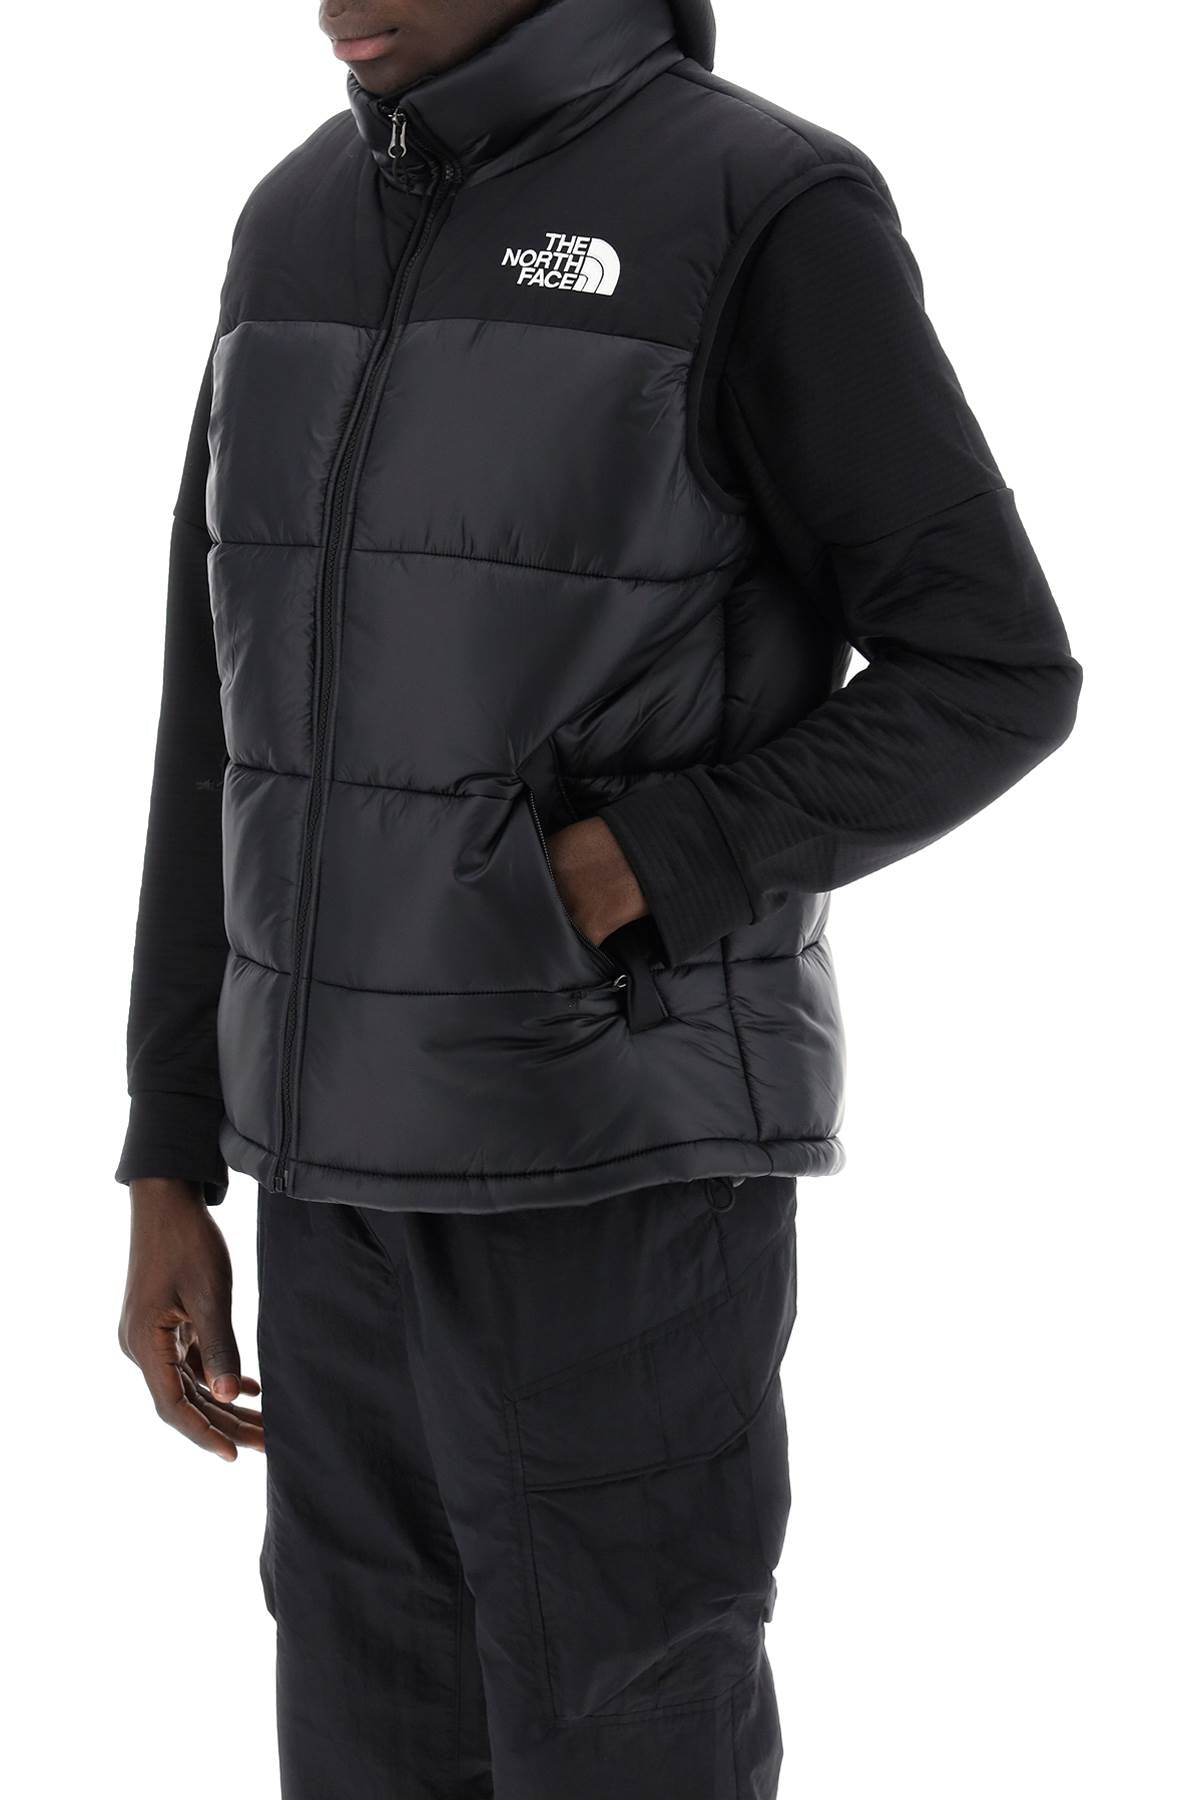 The north face himalayan padded vest-3